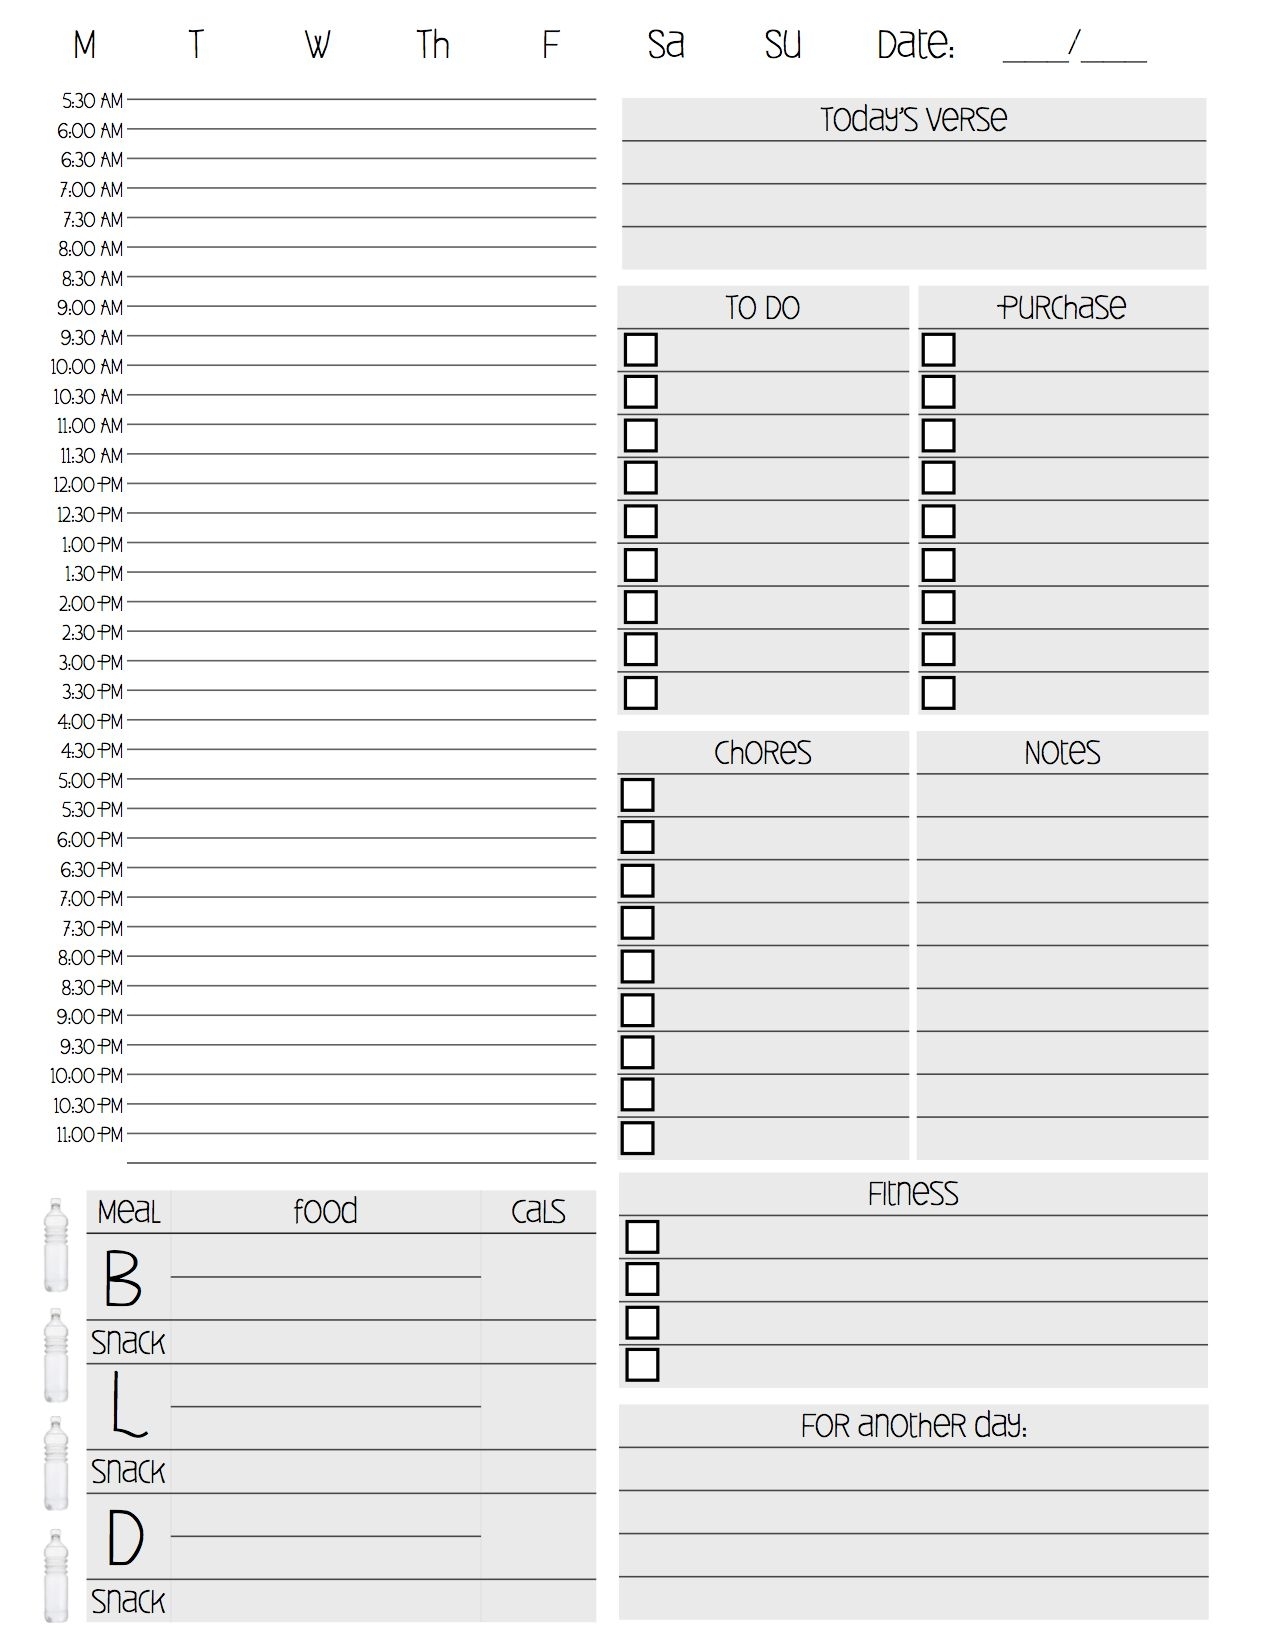 Daily Planner Sheet Print One A Day To Make Life Easier. This throughout Large Printable Daily Schedule Template